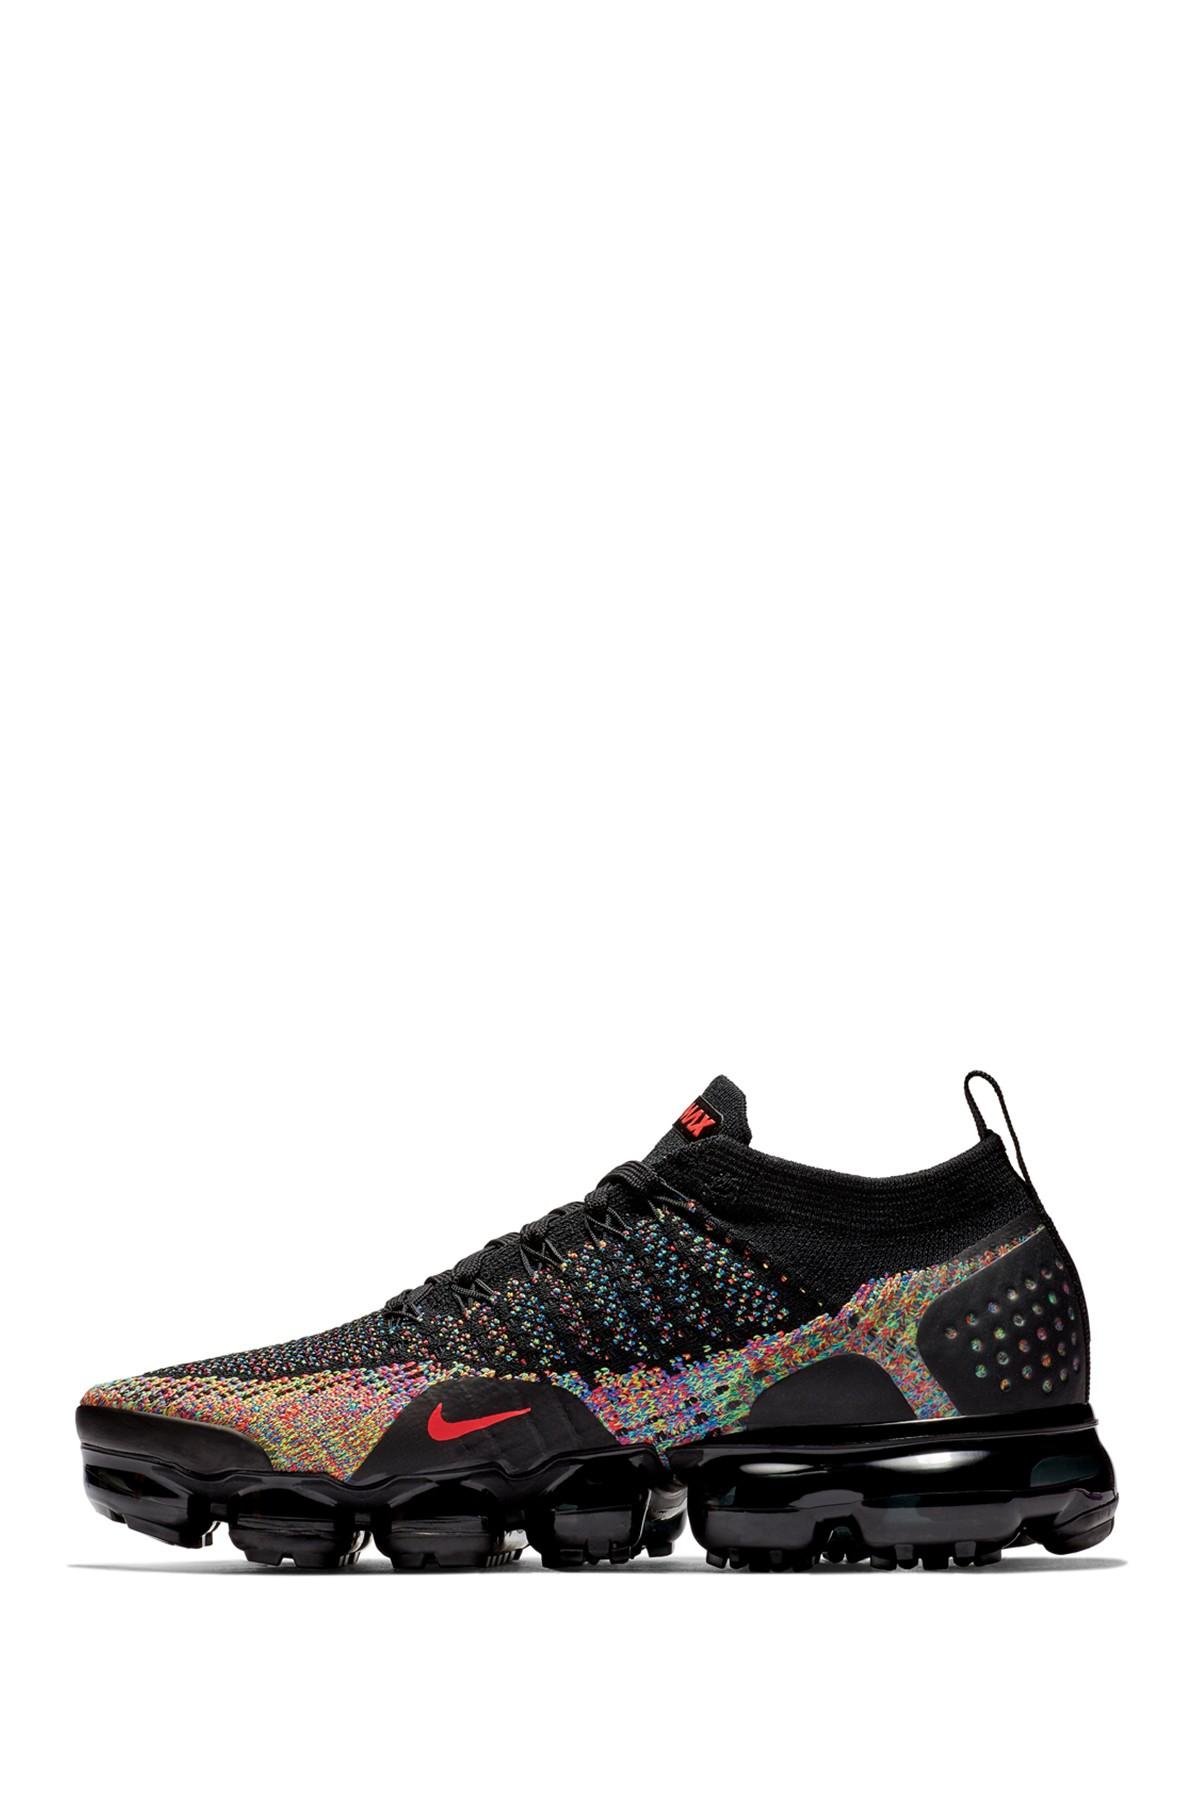 Nike Air Vapormax Flyknit Multi-color | Lyst